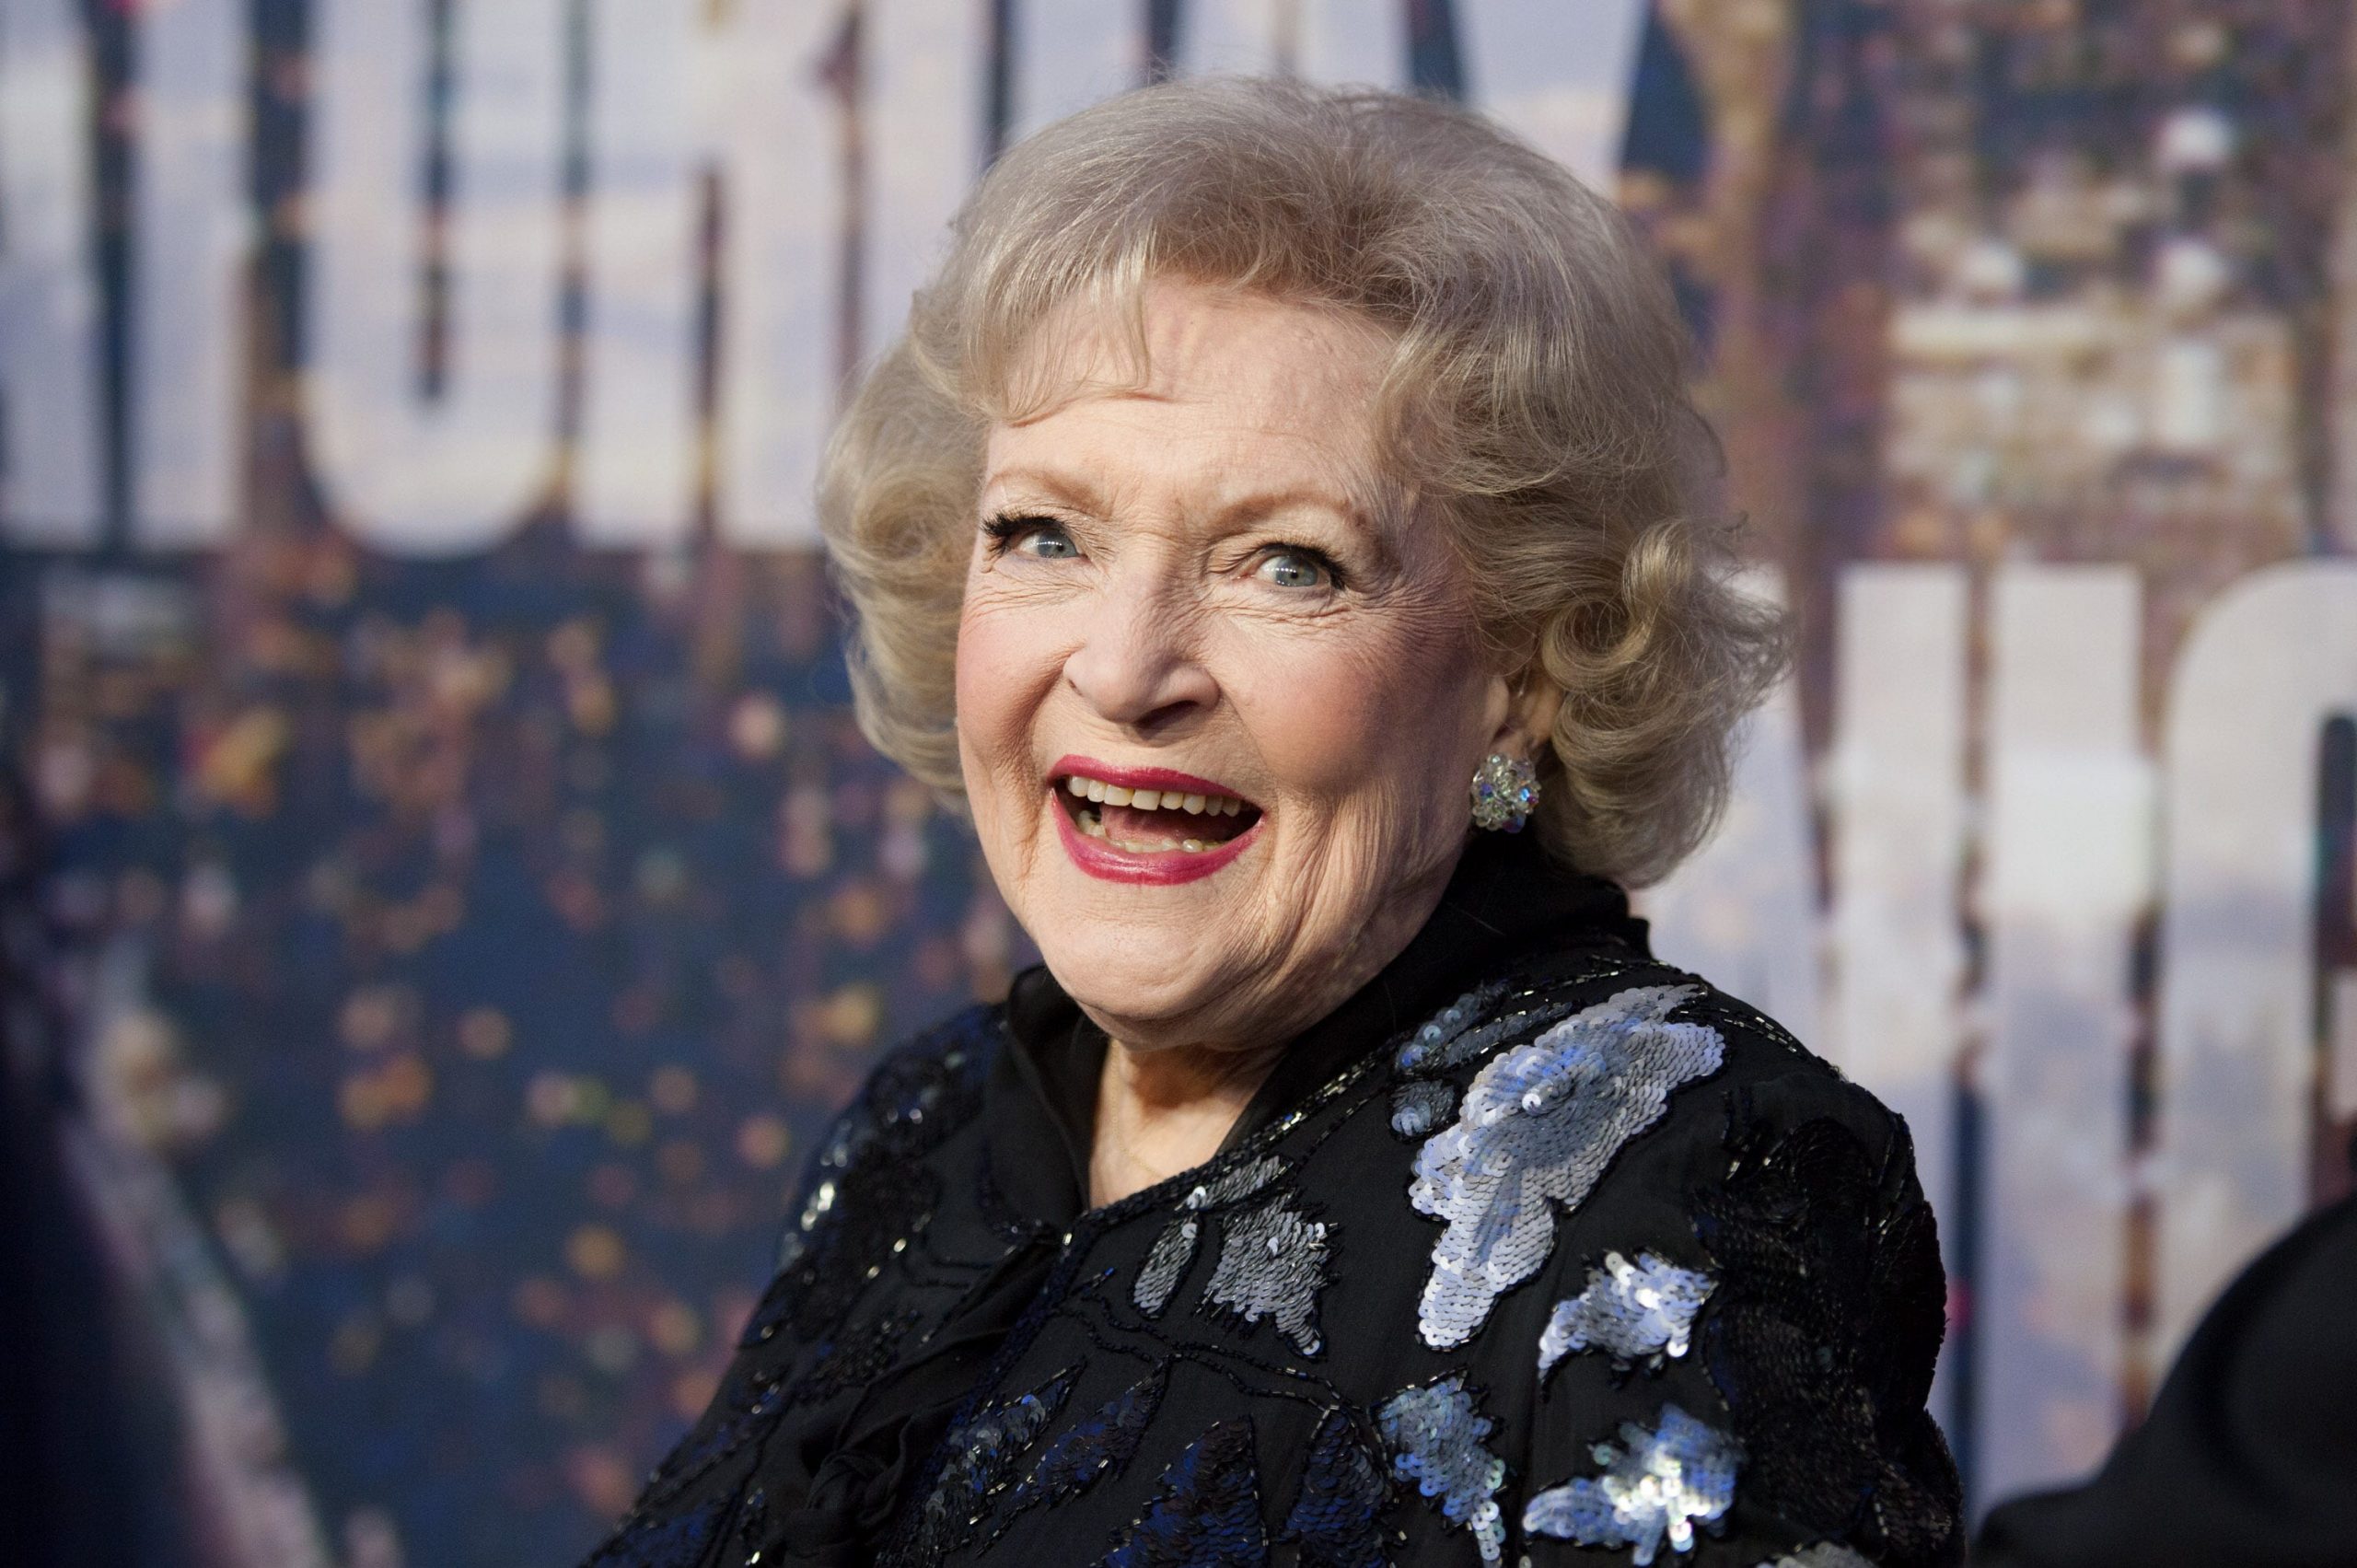 Betty White attends the SNL 40th Anniversary Celebration at Rockefeller Plaza on February 15, 2015 in New York City.